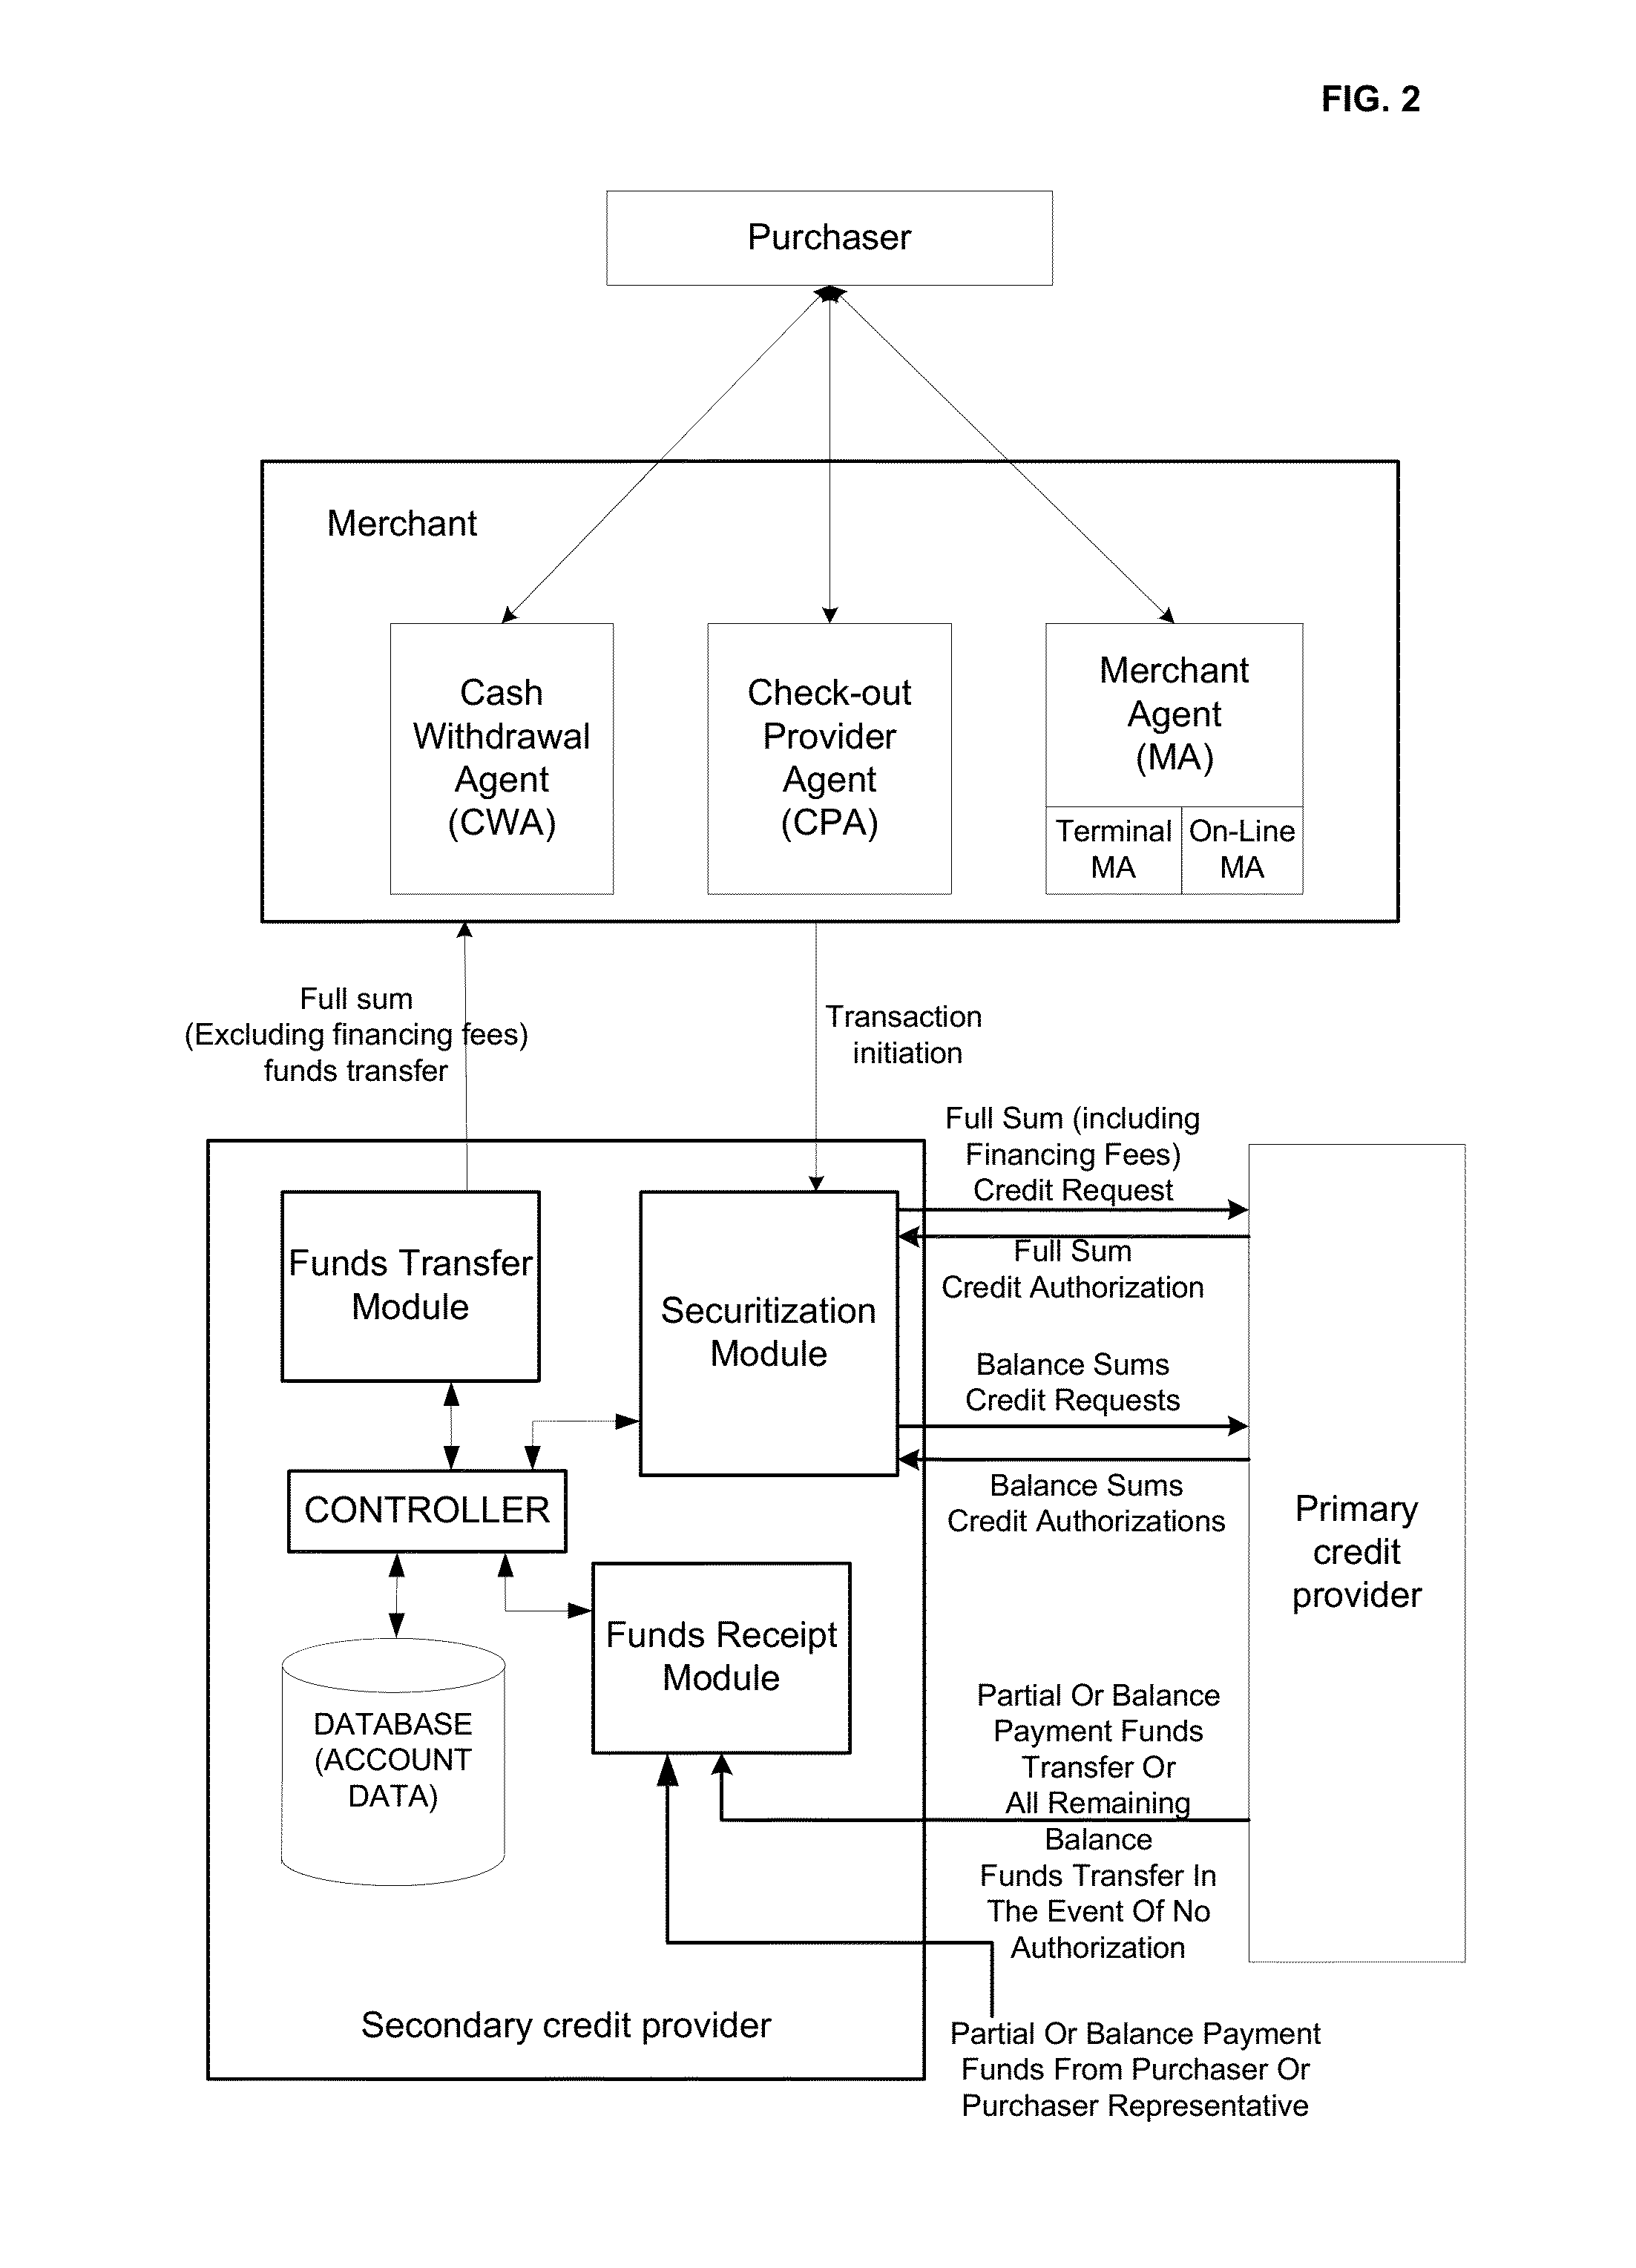 Methods, Systems, Devices and Associated Computer Executable Code for Facilitating Credit Based Transactions between Private Individuals